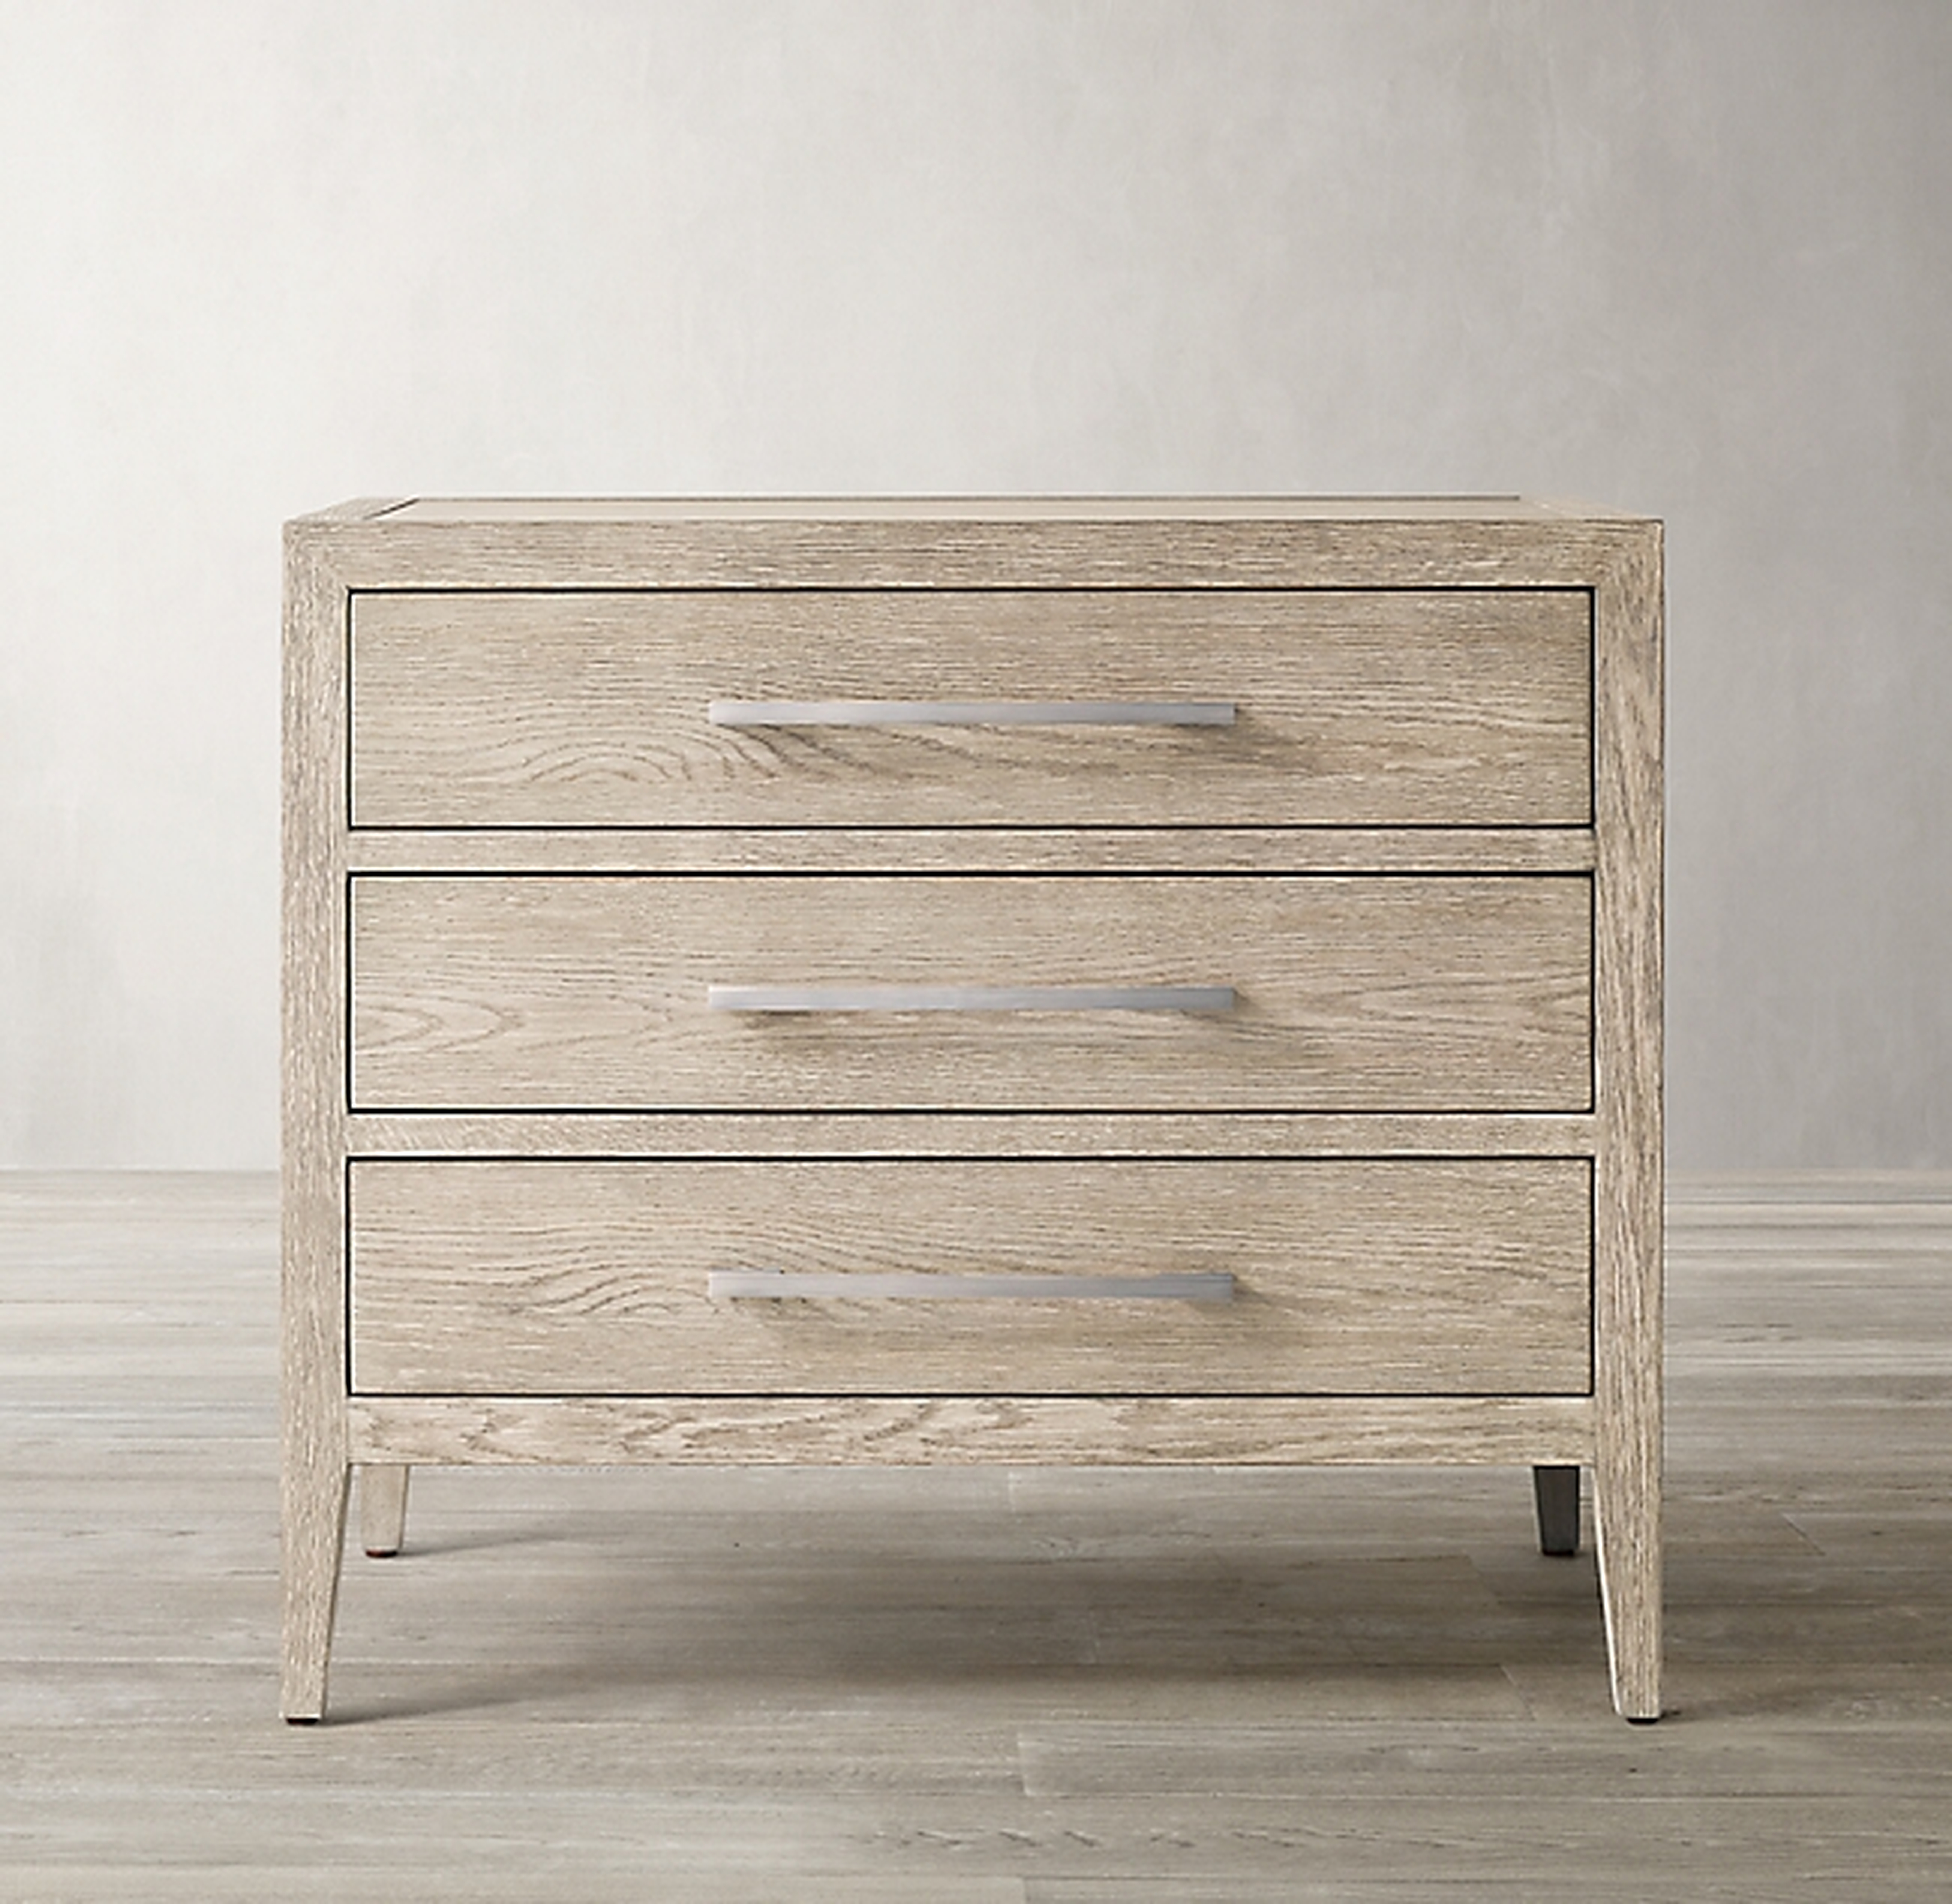 FRENCH CONTEMPORARY CLOSED NIGHTSTAND 26" - RH